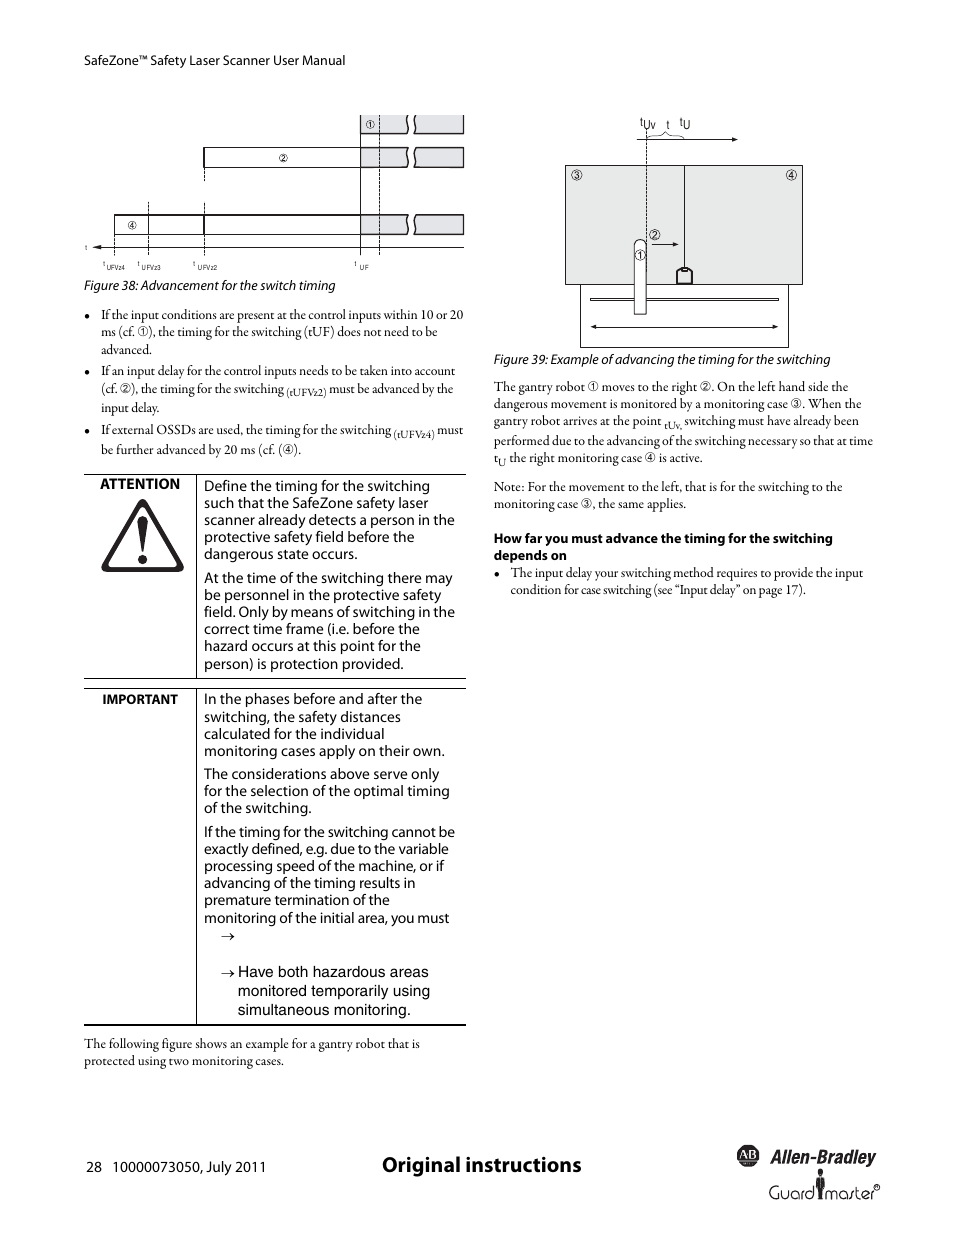 Original instructions | Rockwell Automation 442L SafeZone Singlezone & Multizone Safety Laser Scanner User Manual | Page 30 / 60